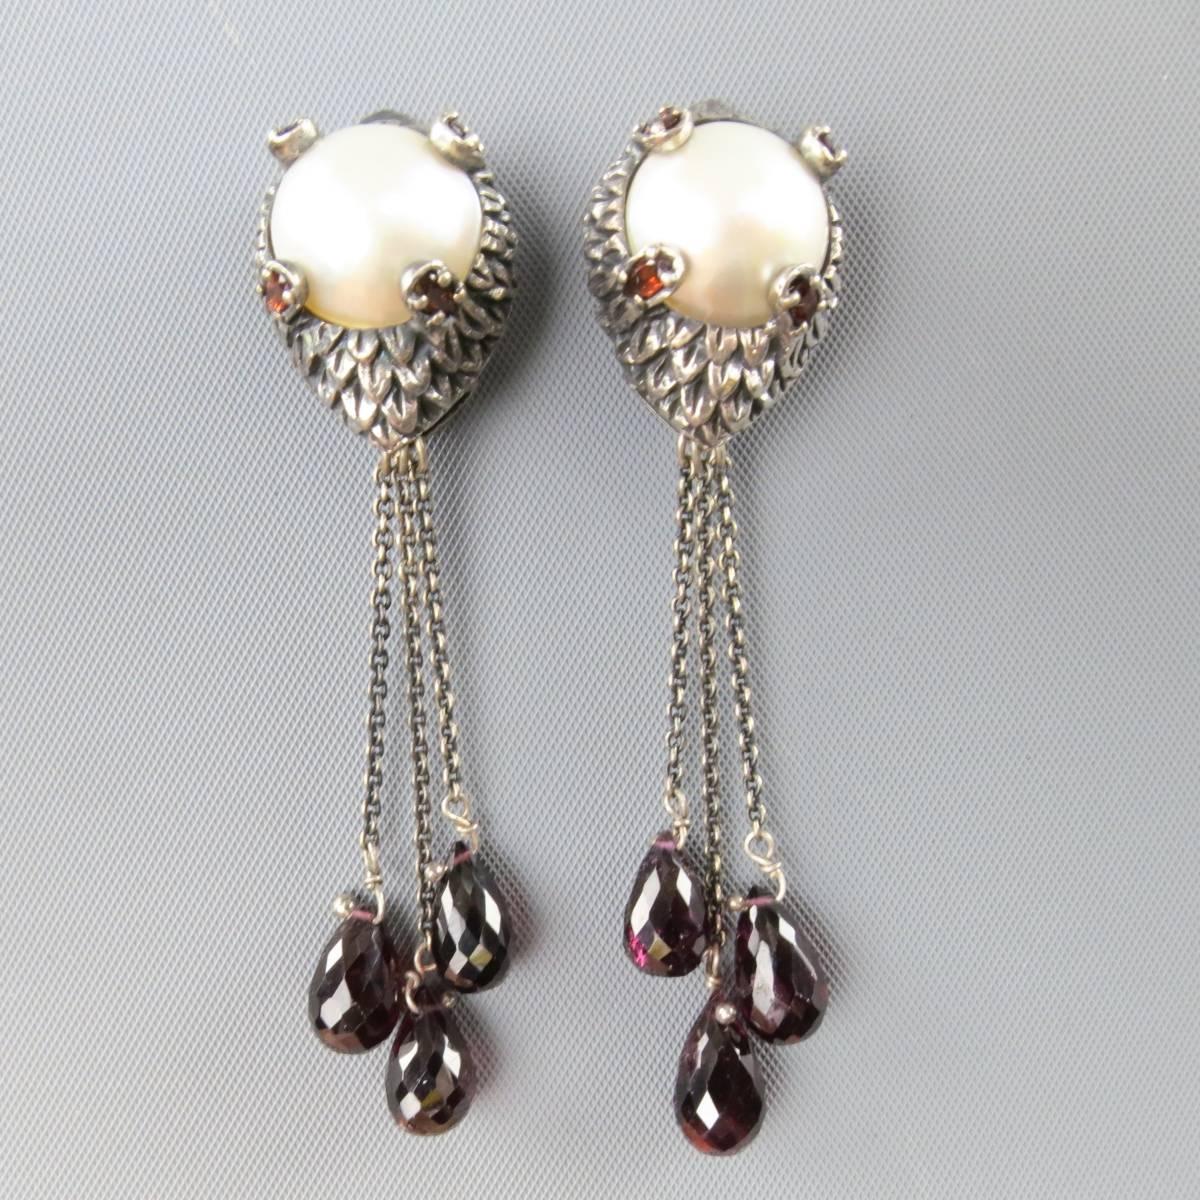 Vintage statement earrings feature a sterling silver leaf engraved base with oversized faux pearl center embellished with crystals and three cascading amethyst teardrops on chains.
 
Good Pre-Owned Condition.
Marked: 925
 
Length: 7.5 cm.
Width: 1.5